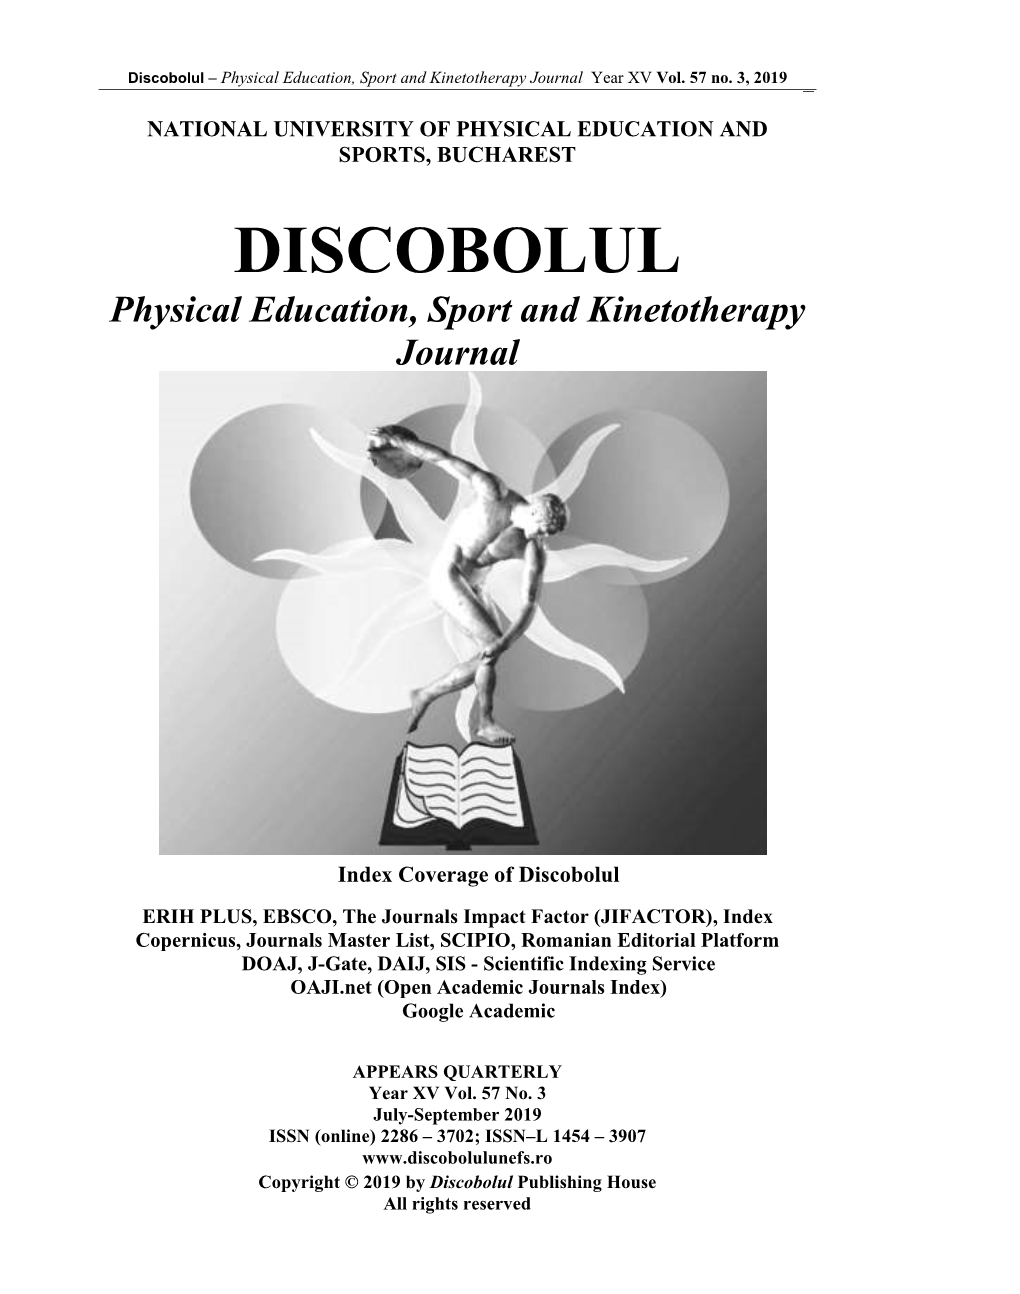 DISCOBOLUL Physical Education, Sport and Kinetotherapy Journal